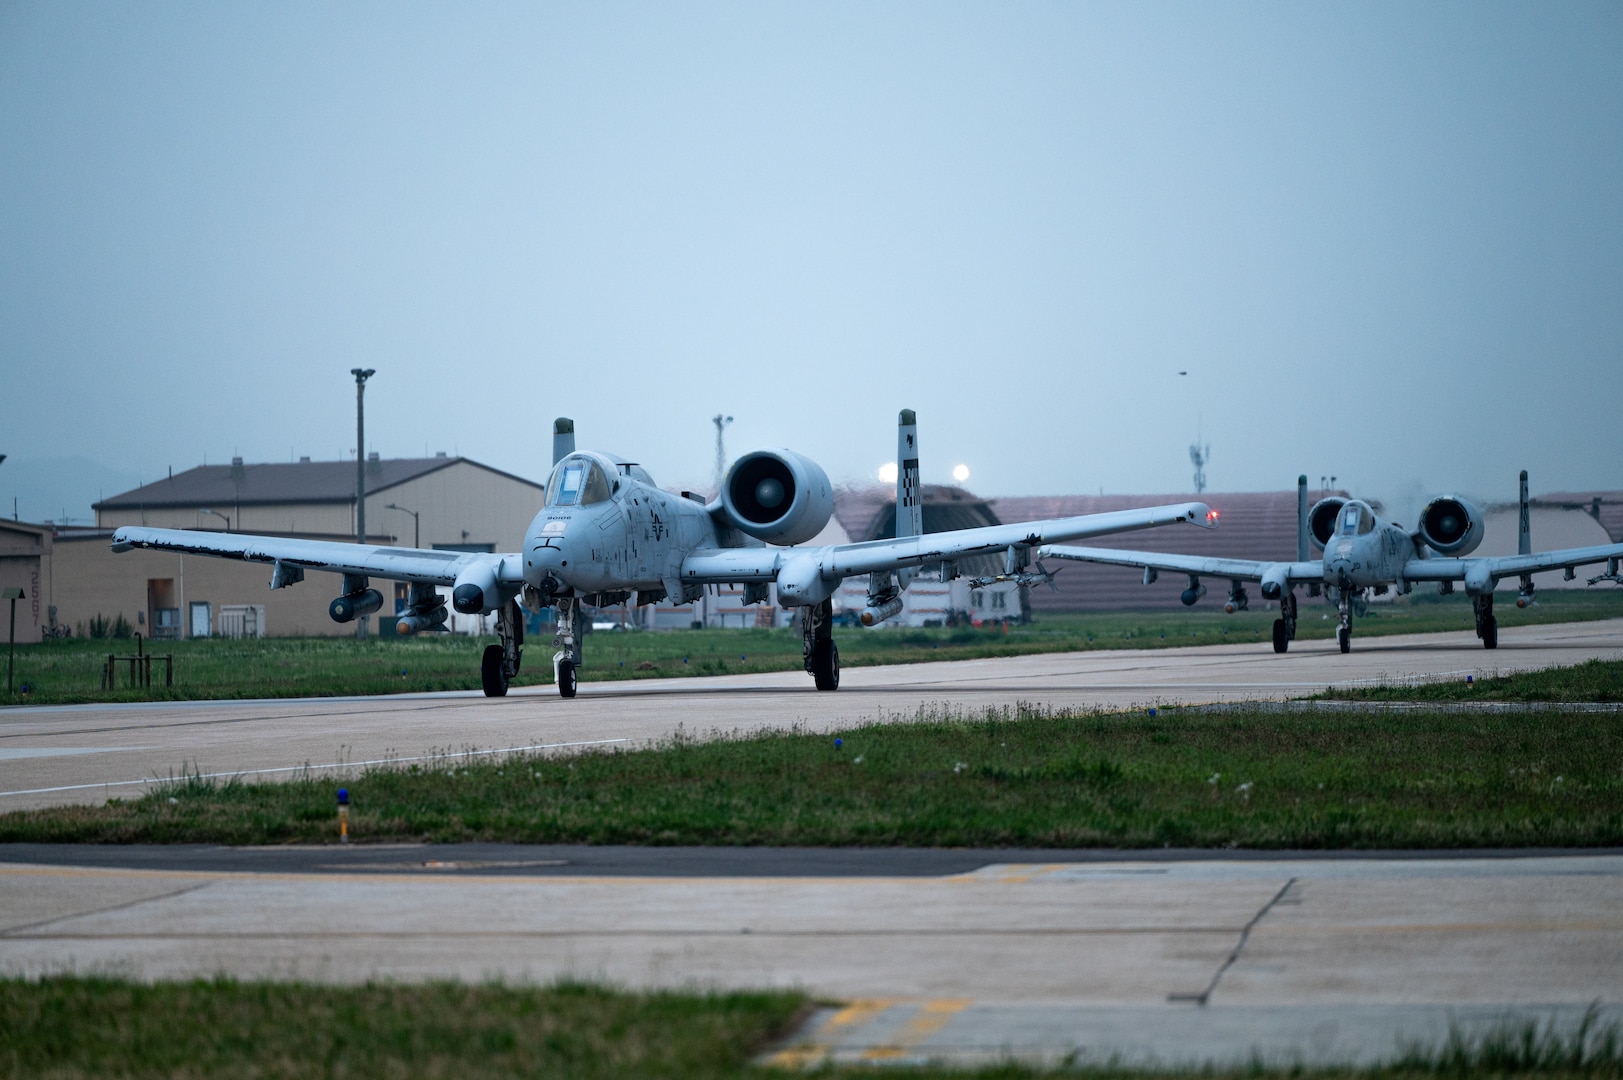 U.S. Air Force A-10C Thunderbolt IIs assigned to the 25th Fighter Squadron, taxi during the Korea Flying Training 2024 event at Kunsan Air Base, Republic of Korea, April 26, 2024. KFT 24 focused on the tactical execution of combat missions to maintain military readiness and reinforced the 51st Fighter Wing’s capabilities to operate from locations with varying levels of resources and support. (U.S. Air Force photo by Staff Sgt. Jovan Banks)